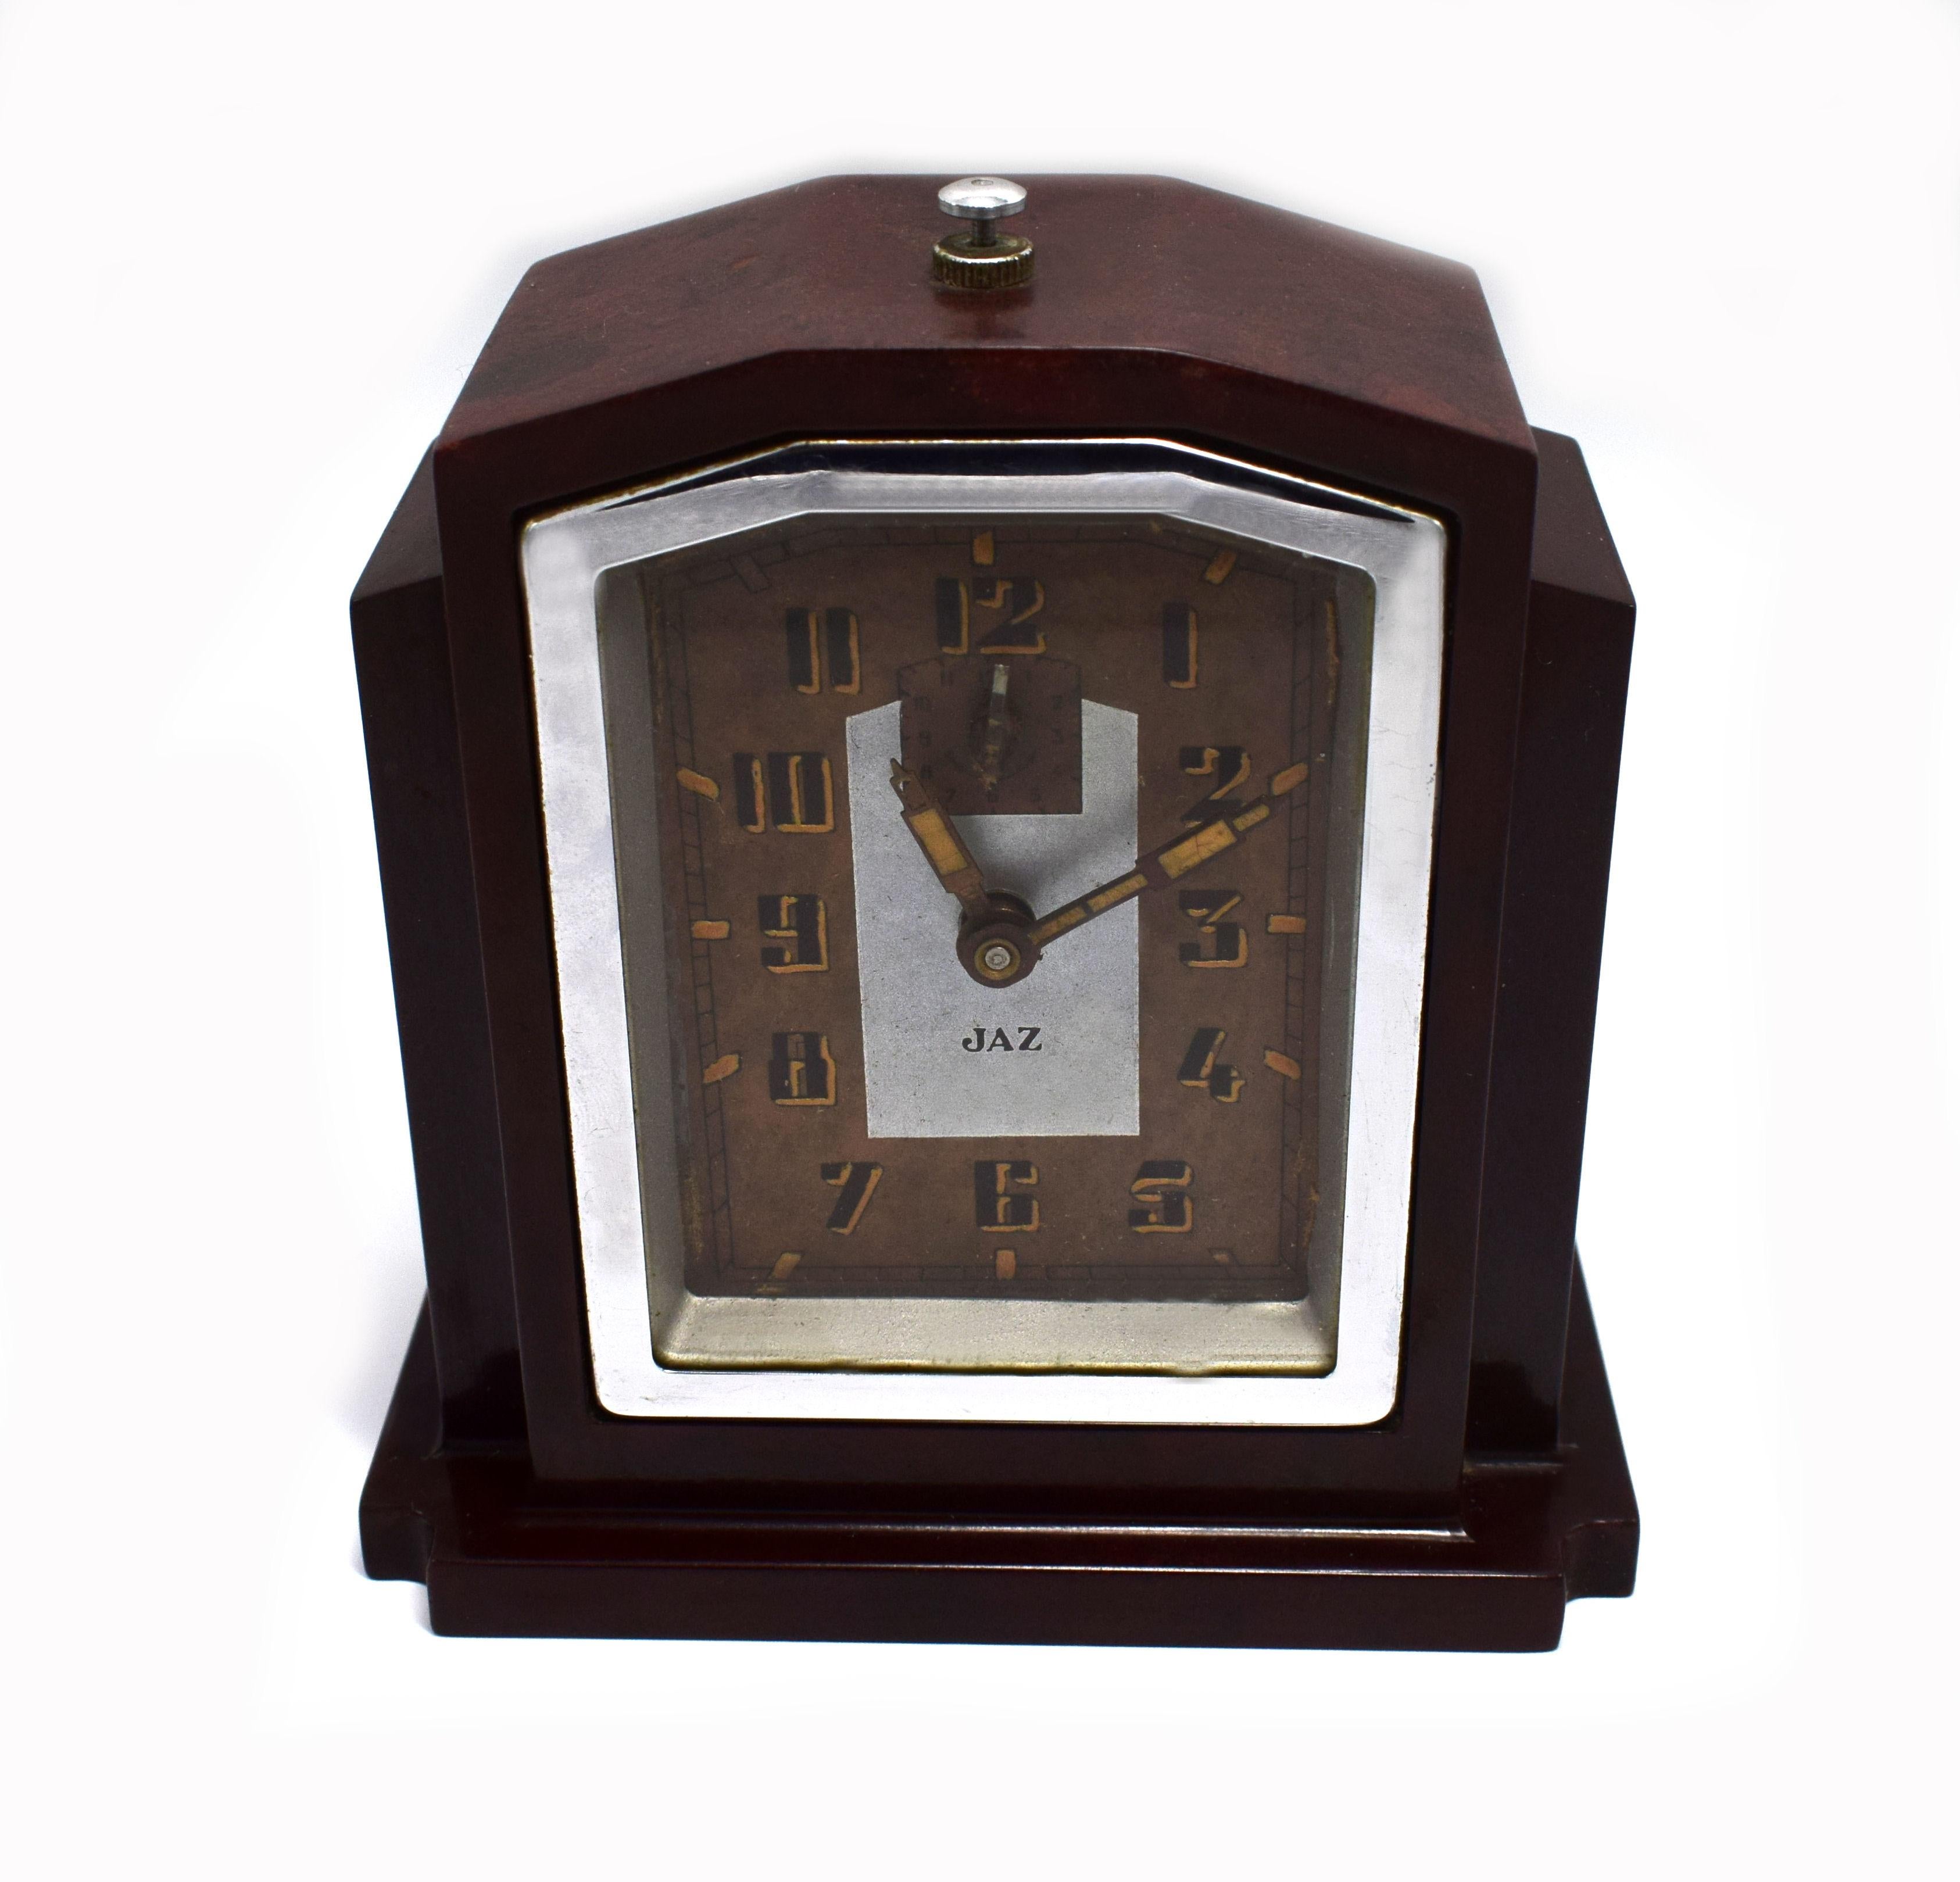 Fabulous 1930s Art Deco clock by JAZ a French clock maker. This clock is in a deep cherry red with black speckles and wonderful skyscraper shaped casing. The condition of the face is particularly good showing little to no signs of it's true age. The